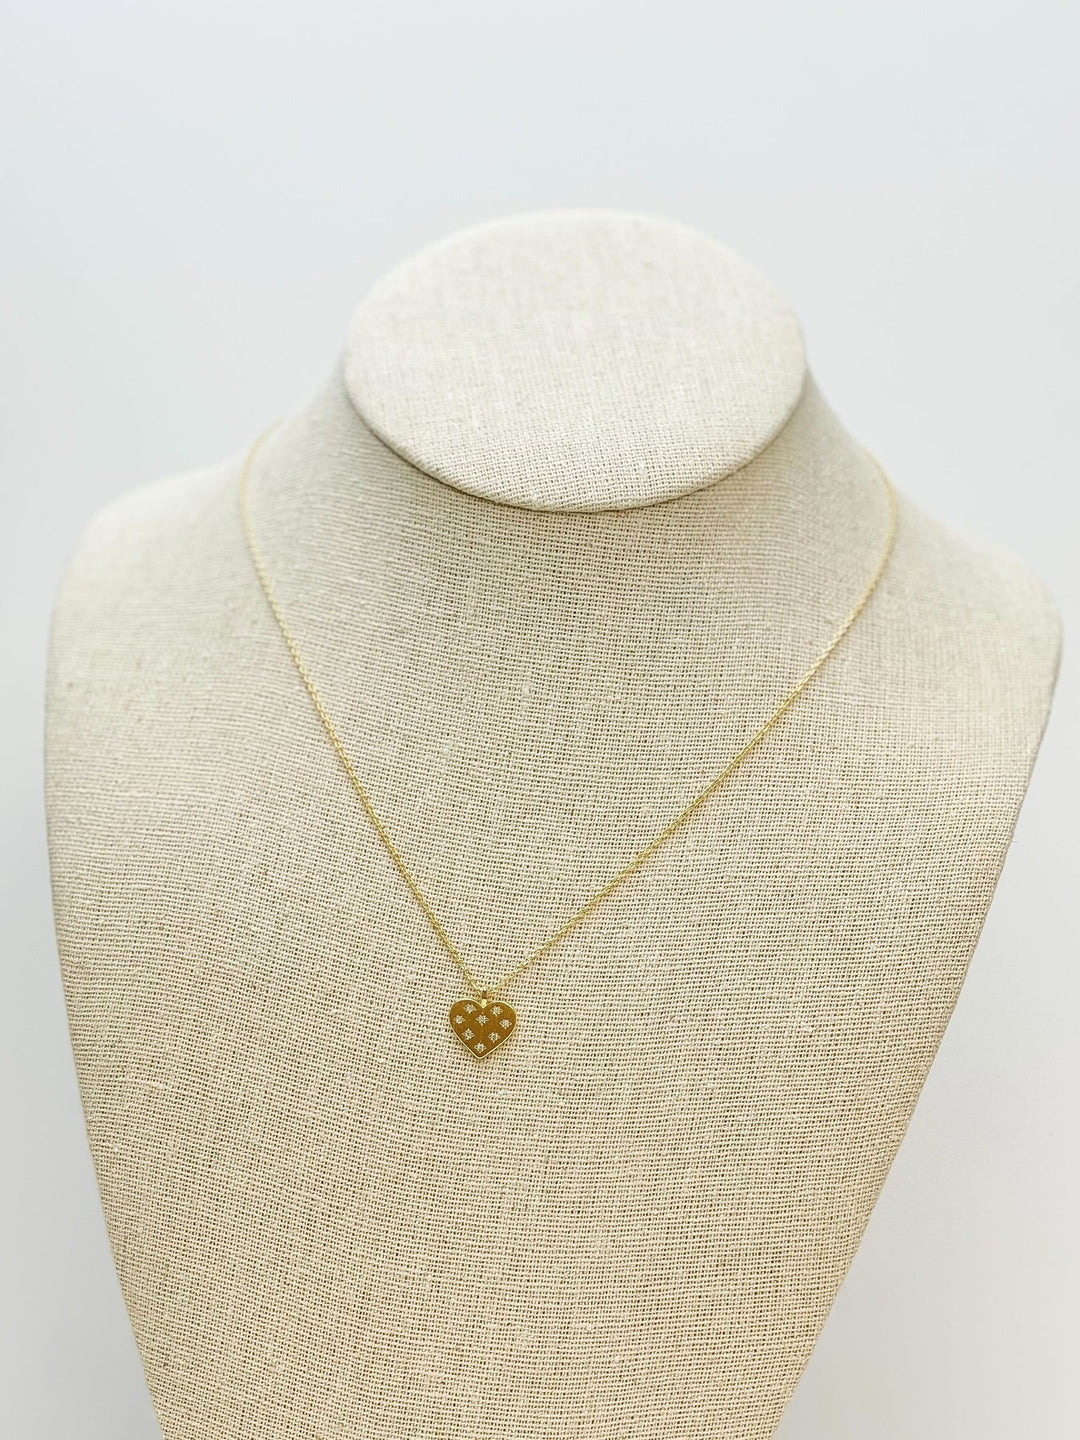 Womens - PREORDER: Crystal-Studded Gold-Dipped Heart Pendant Necklace